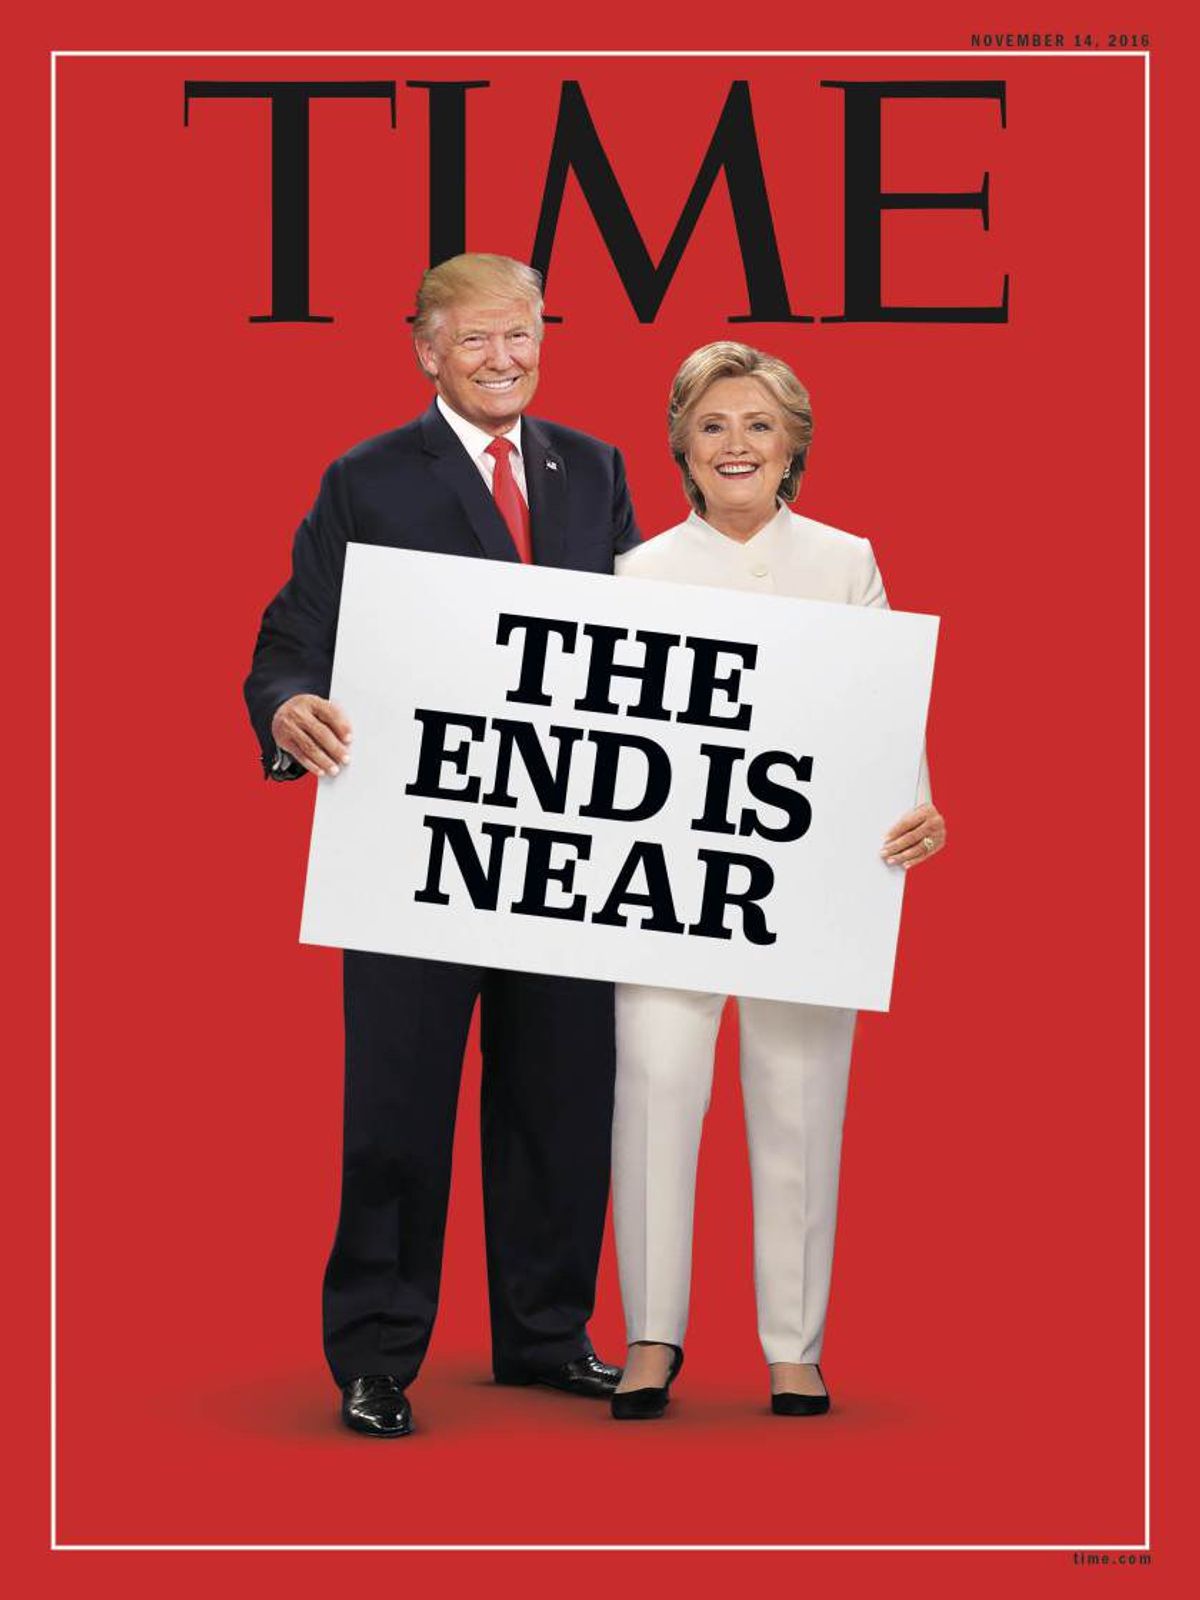 TIME's Latest Cover is Just Messing with Us All